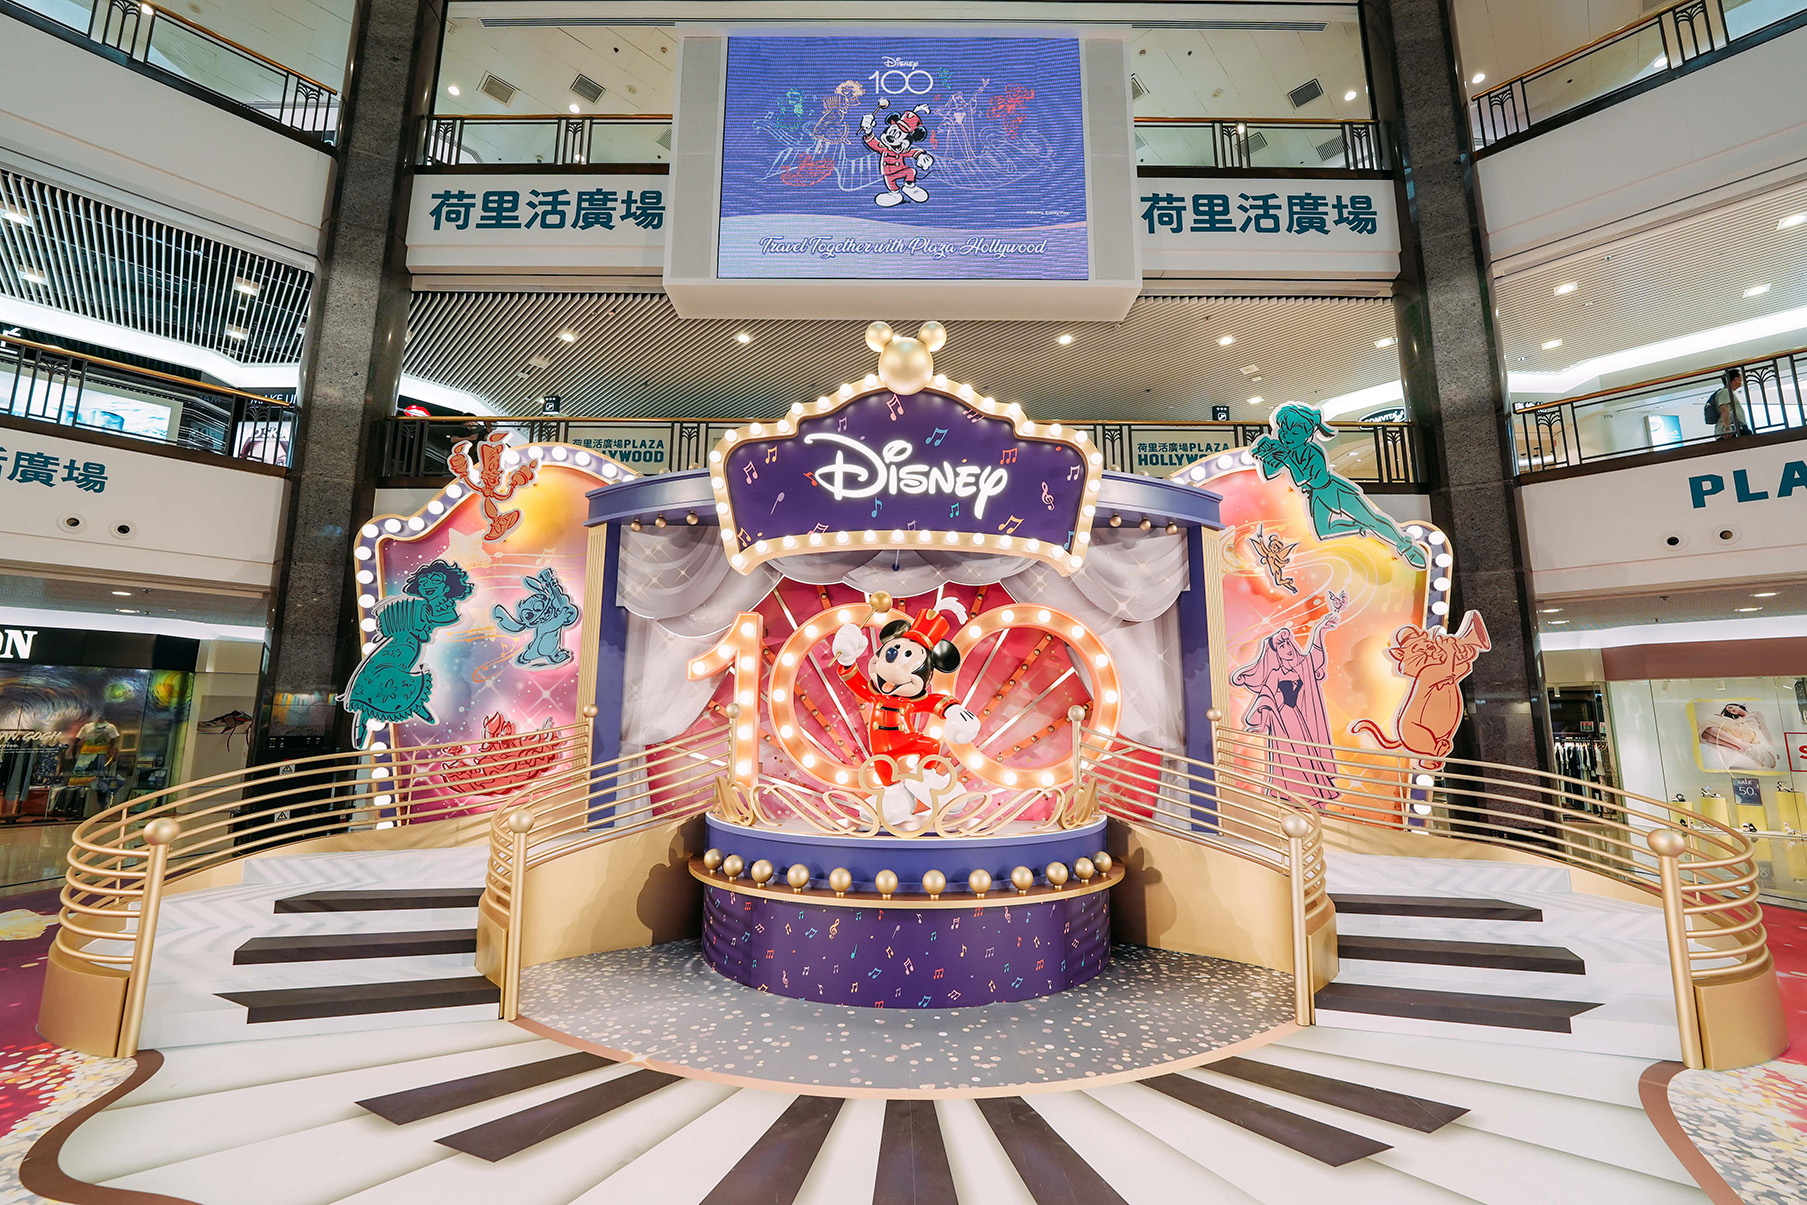 Disney 100th anniversary event in Hong Kong